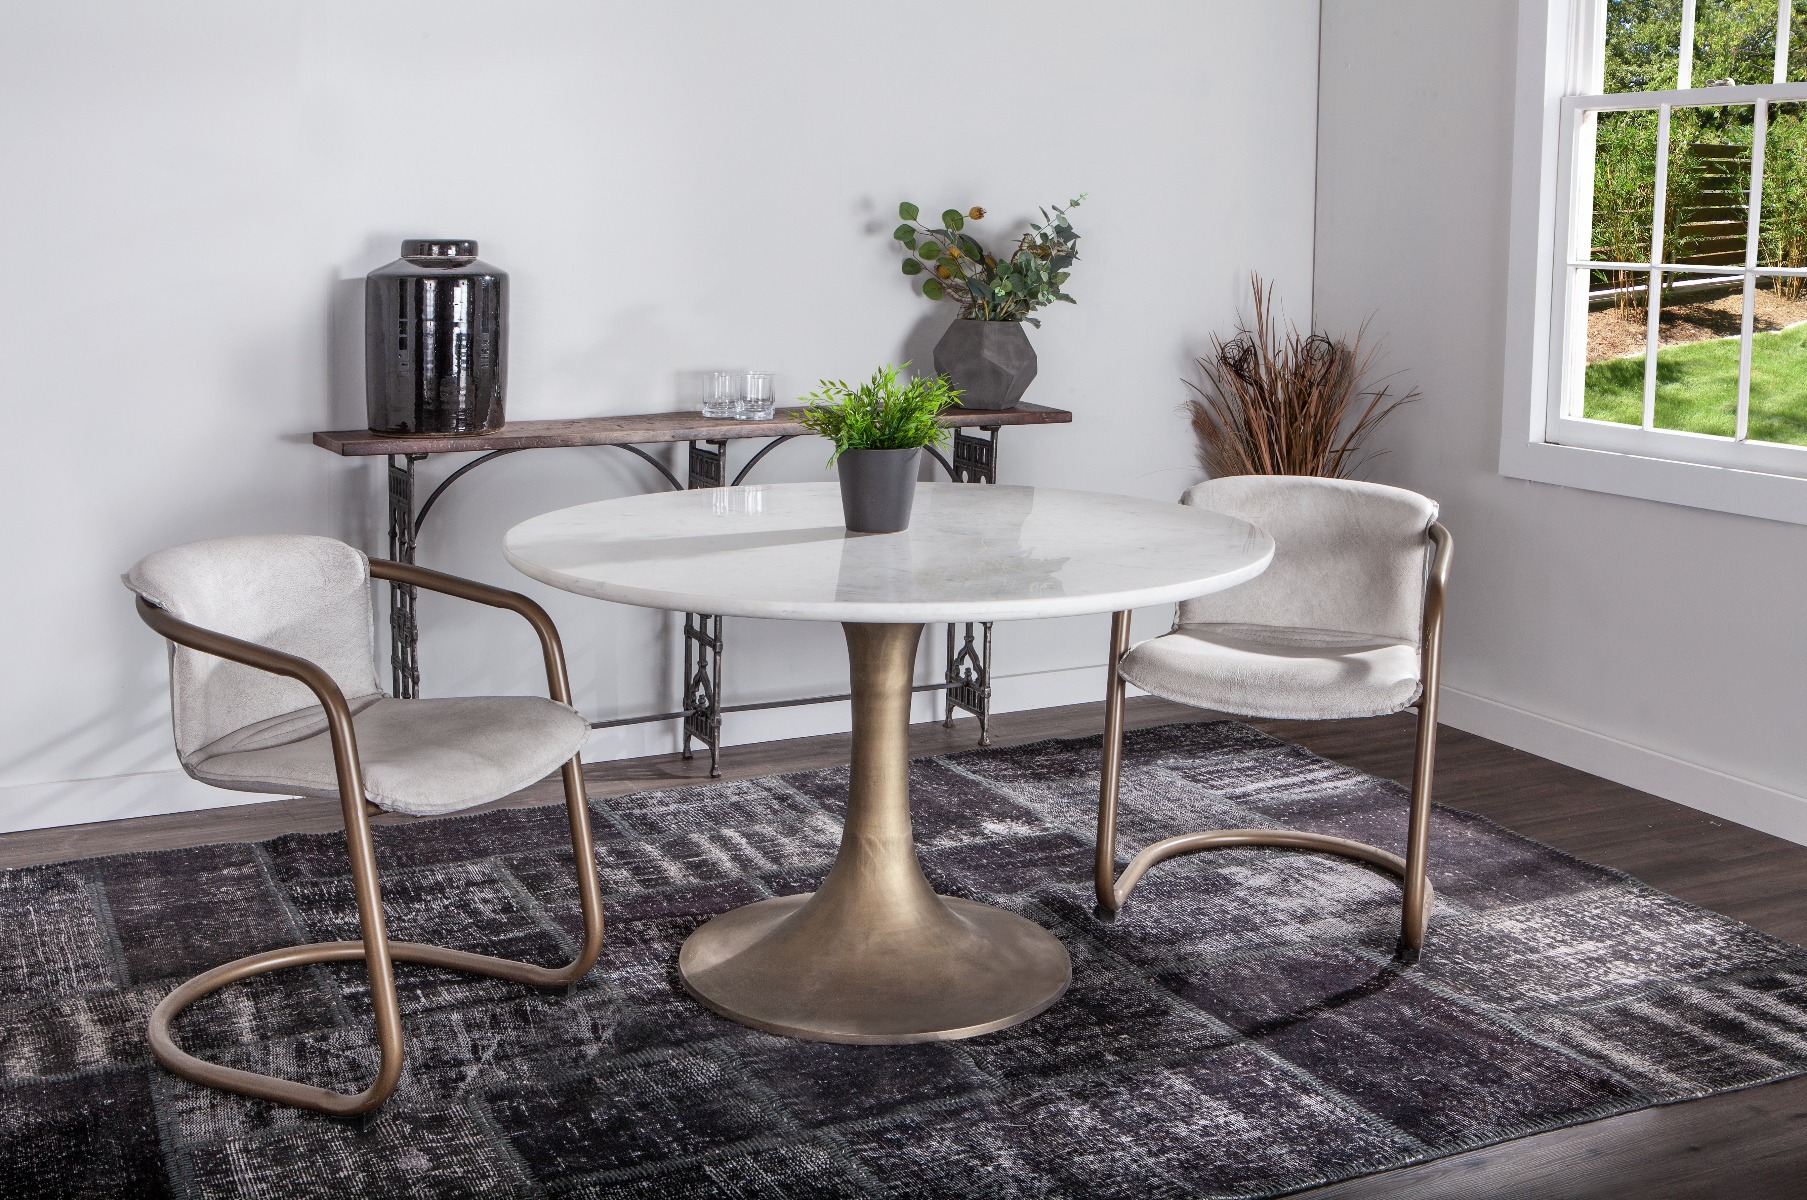 The Palm Desert Mid-Century Modern Table with Chiavari Dining Chairs